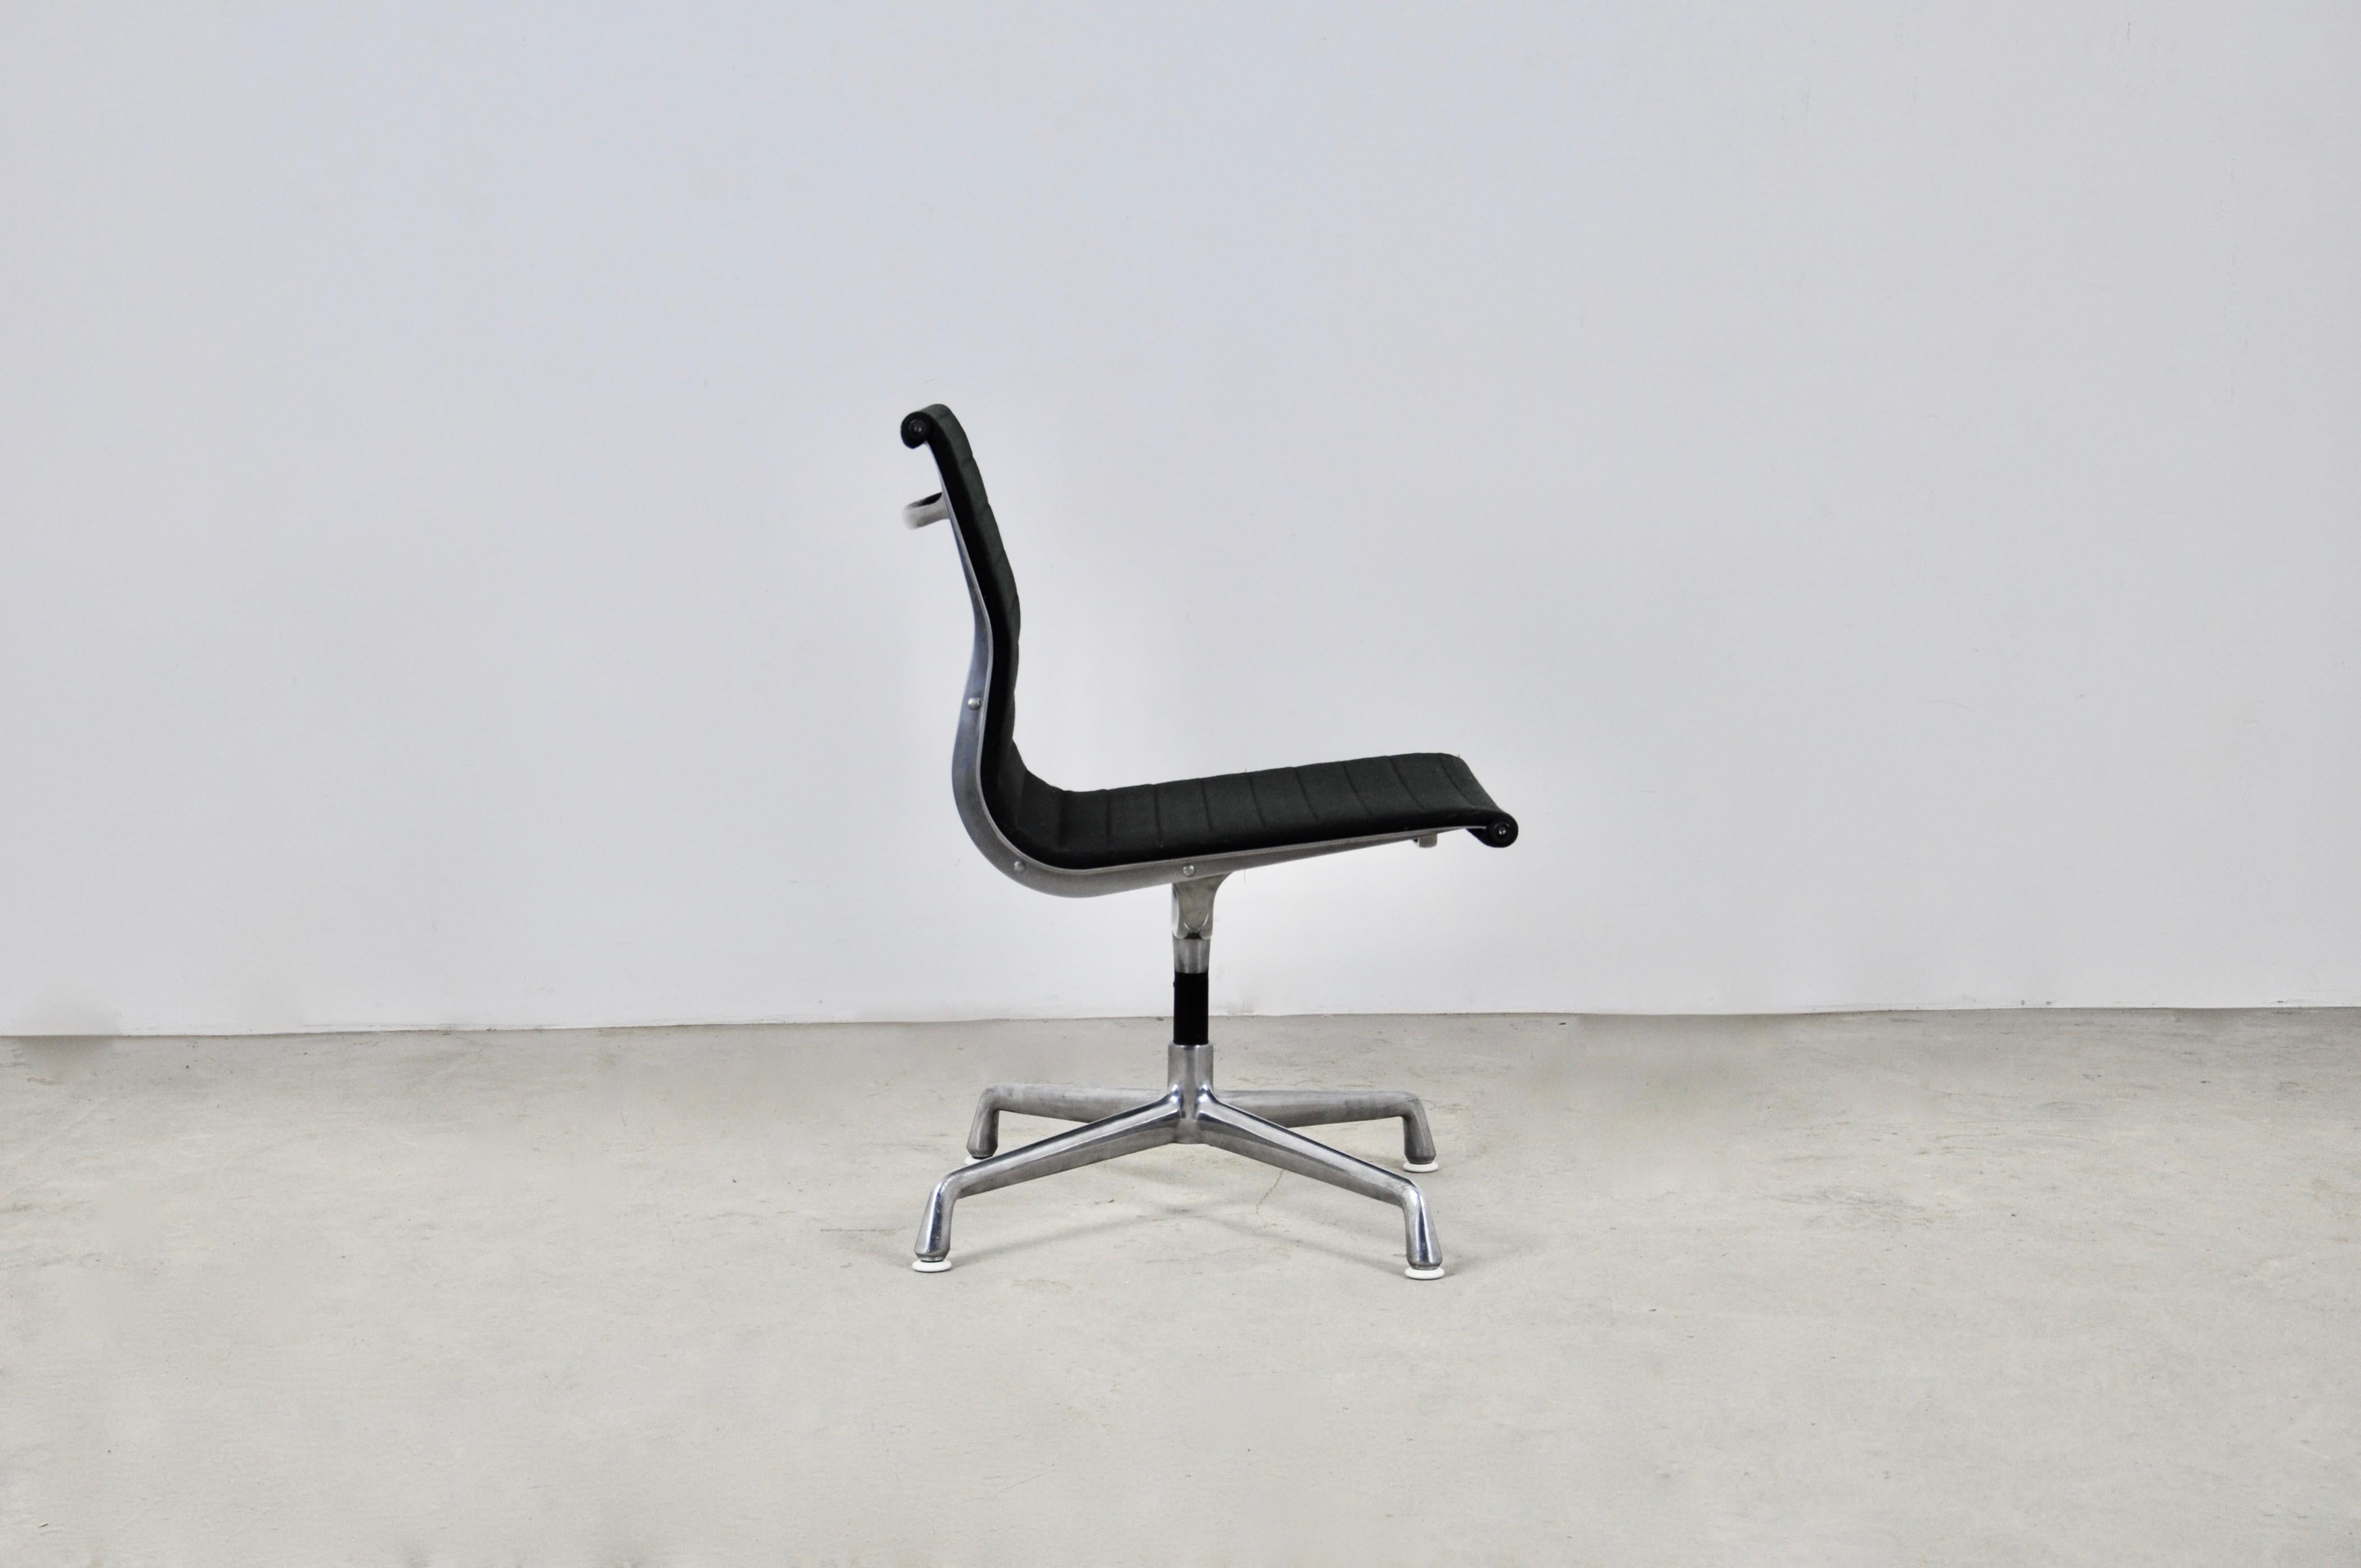 Central American Black Office chair by Charles &Ray Eames for Herman Miller, 1960s For Sale